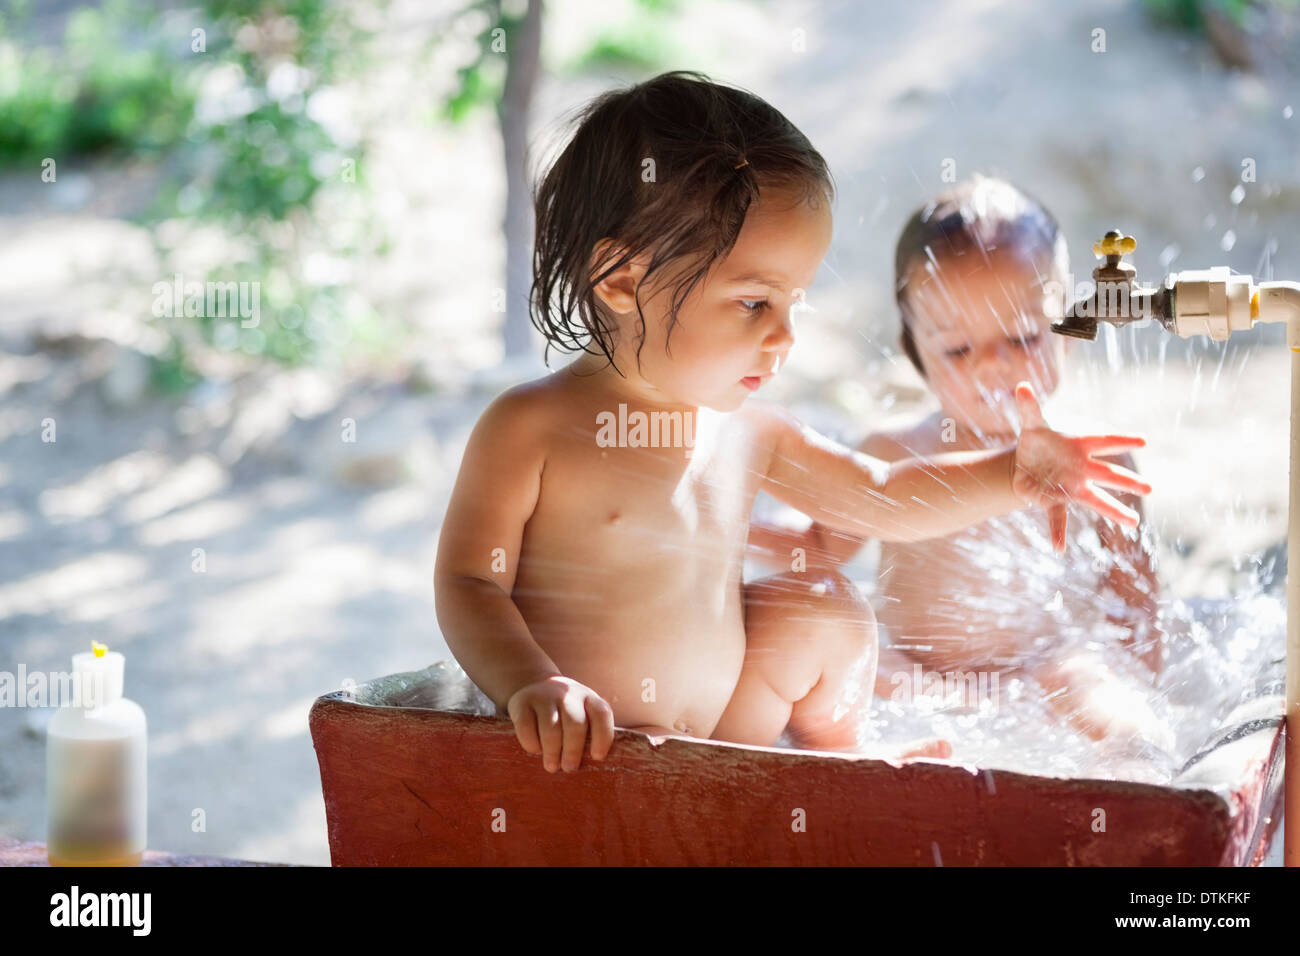 Baby girls playing in water spout outdoors Stock Photo